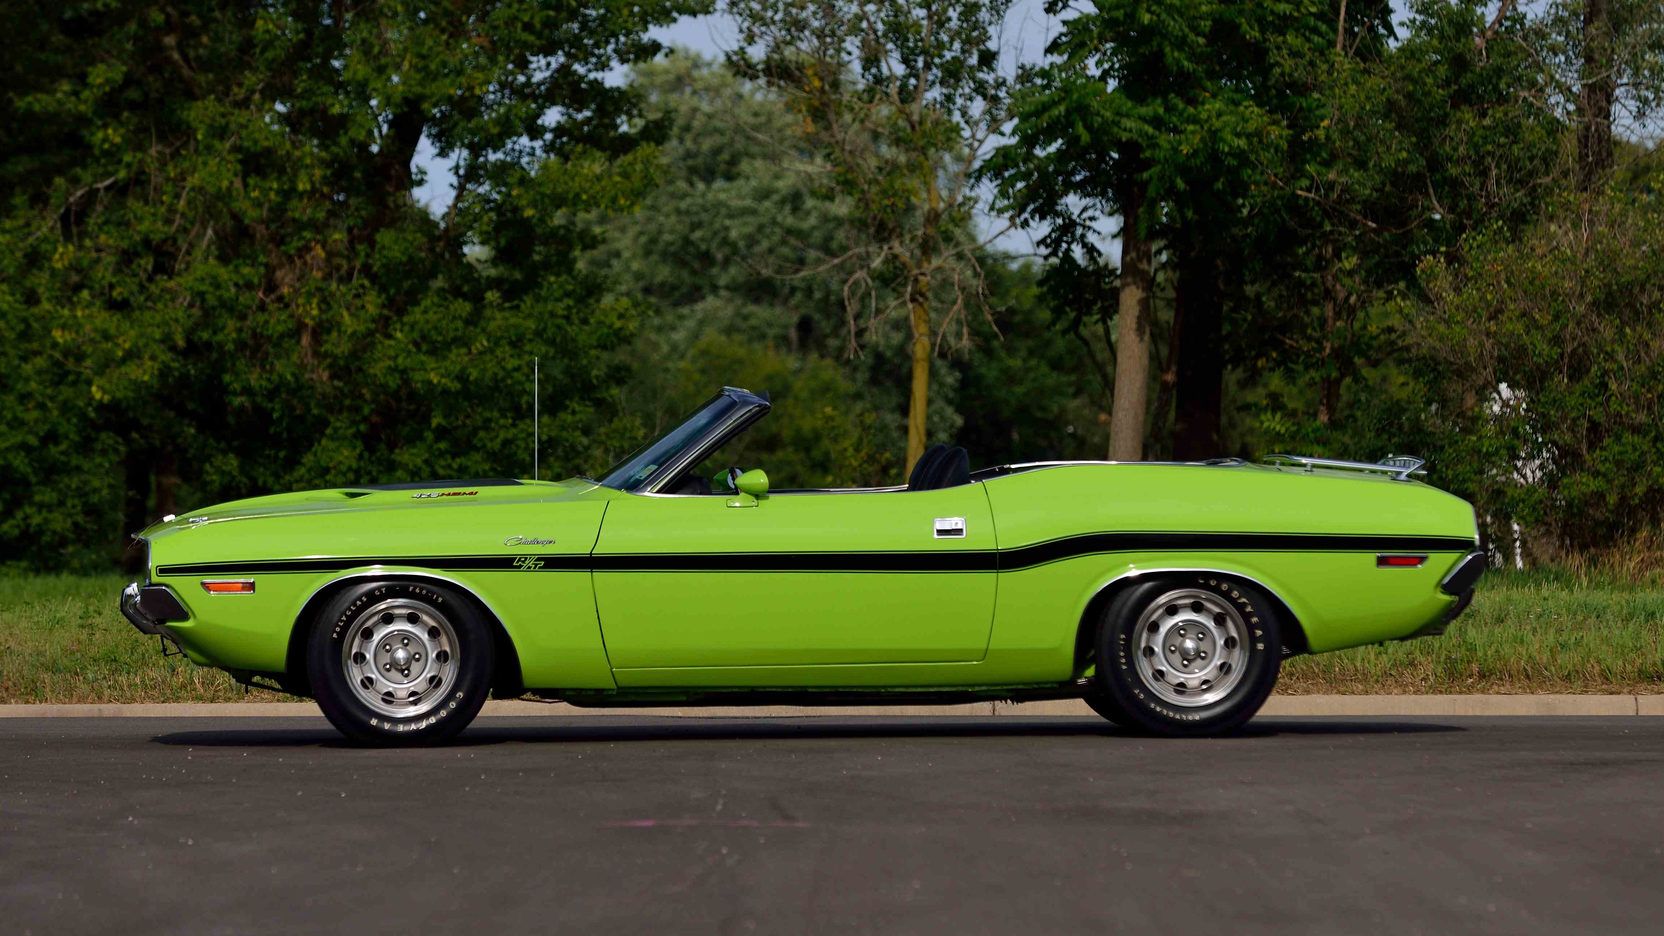 Side view of a A rare sublime green 1970 Dodge Challenger R/T Hemi Convertible 